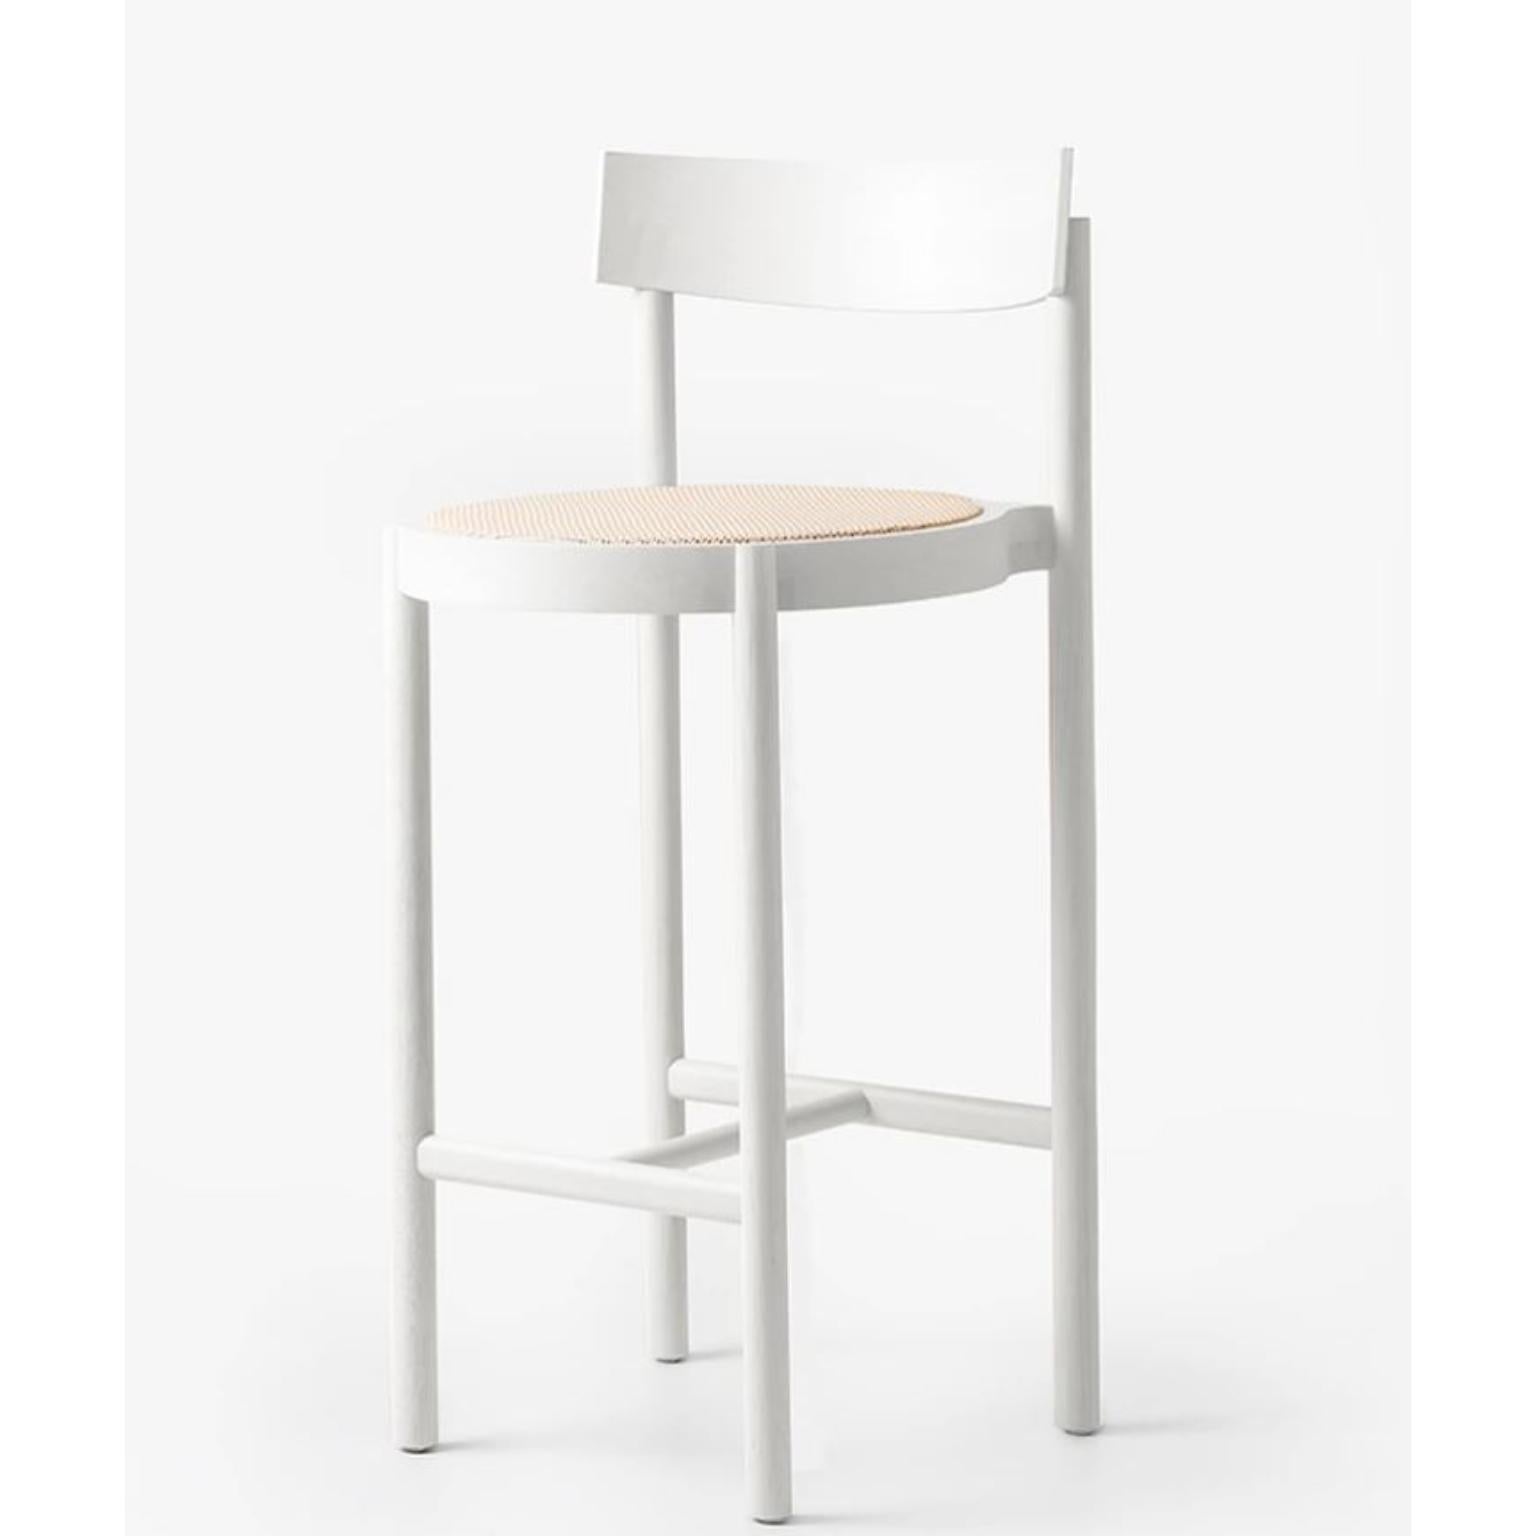 White Gravatá Counter Stool by Wentz
Dimensions: D 52 x W 47 x H 90 cm
Materials: Tauari Wood, Cane/Upholstery.
Weight: 4,4kg / 9,7 lbs

The Gravatá series synthesizes our vision regarding the functional and visual simplicity of furniture. Through